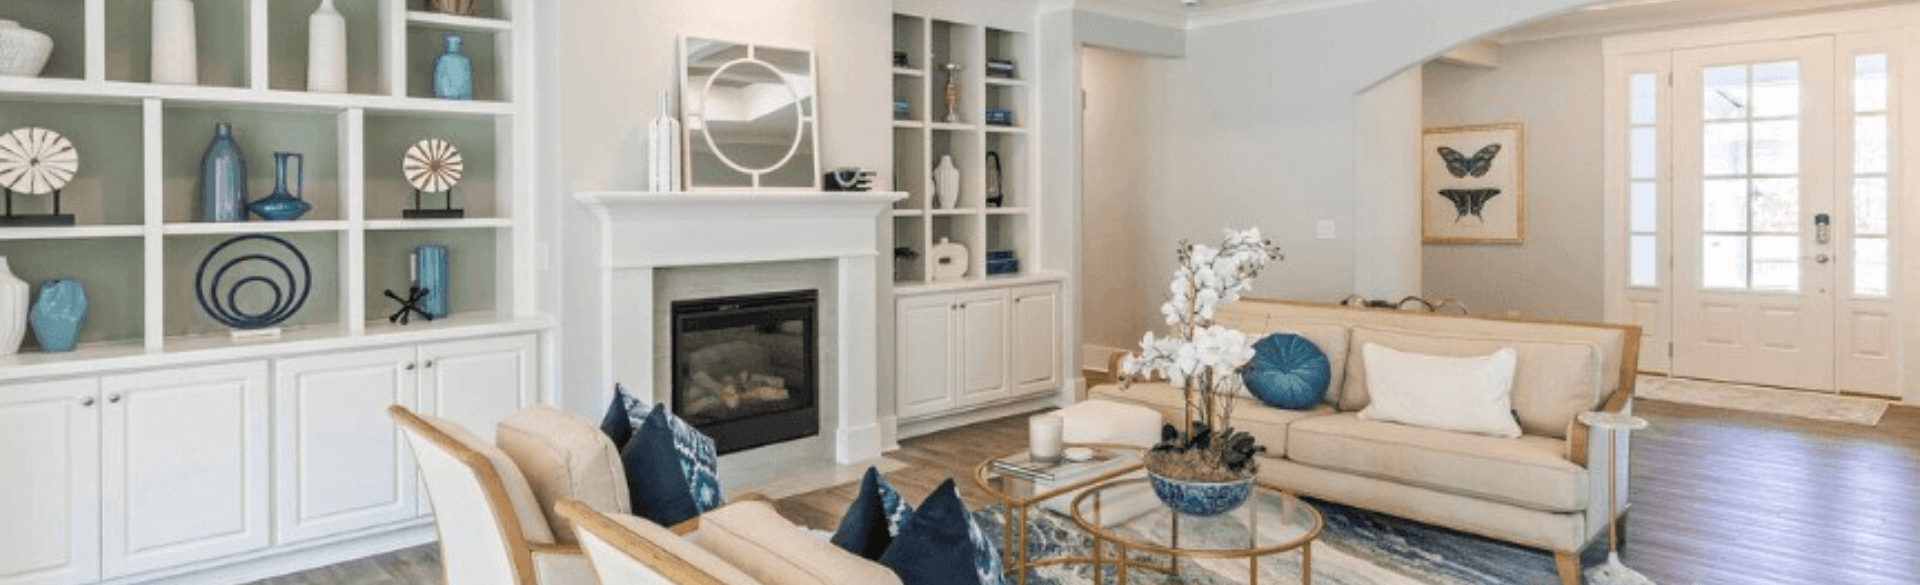 Interior model home within the Riverlights community in Wilmington, NC